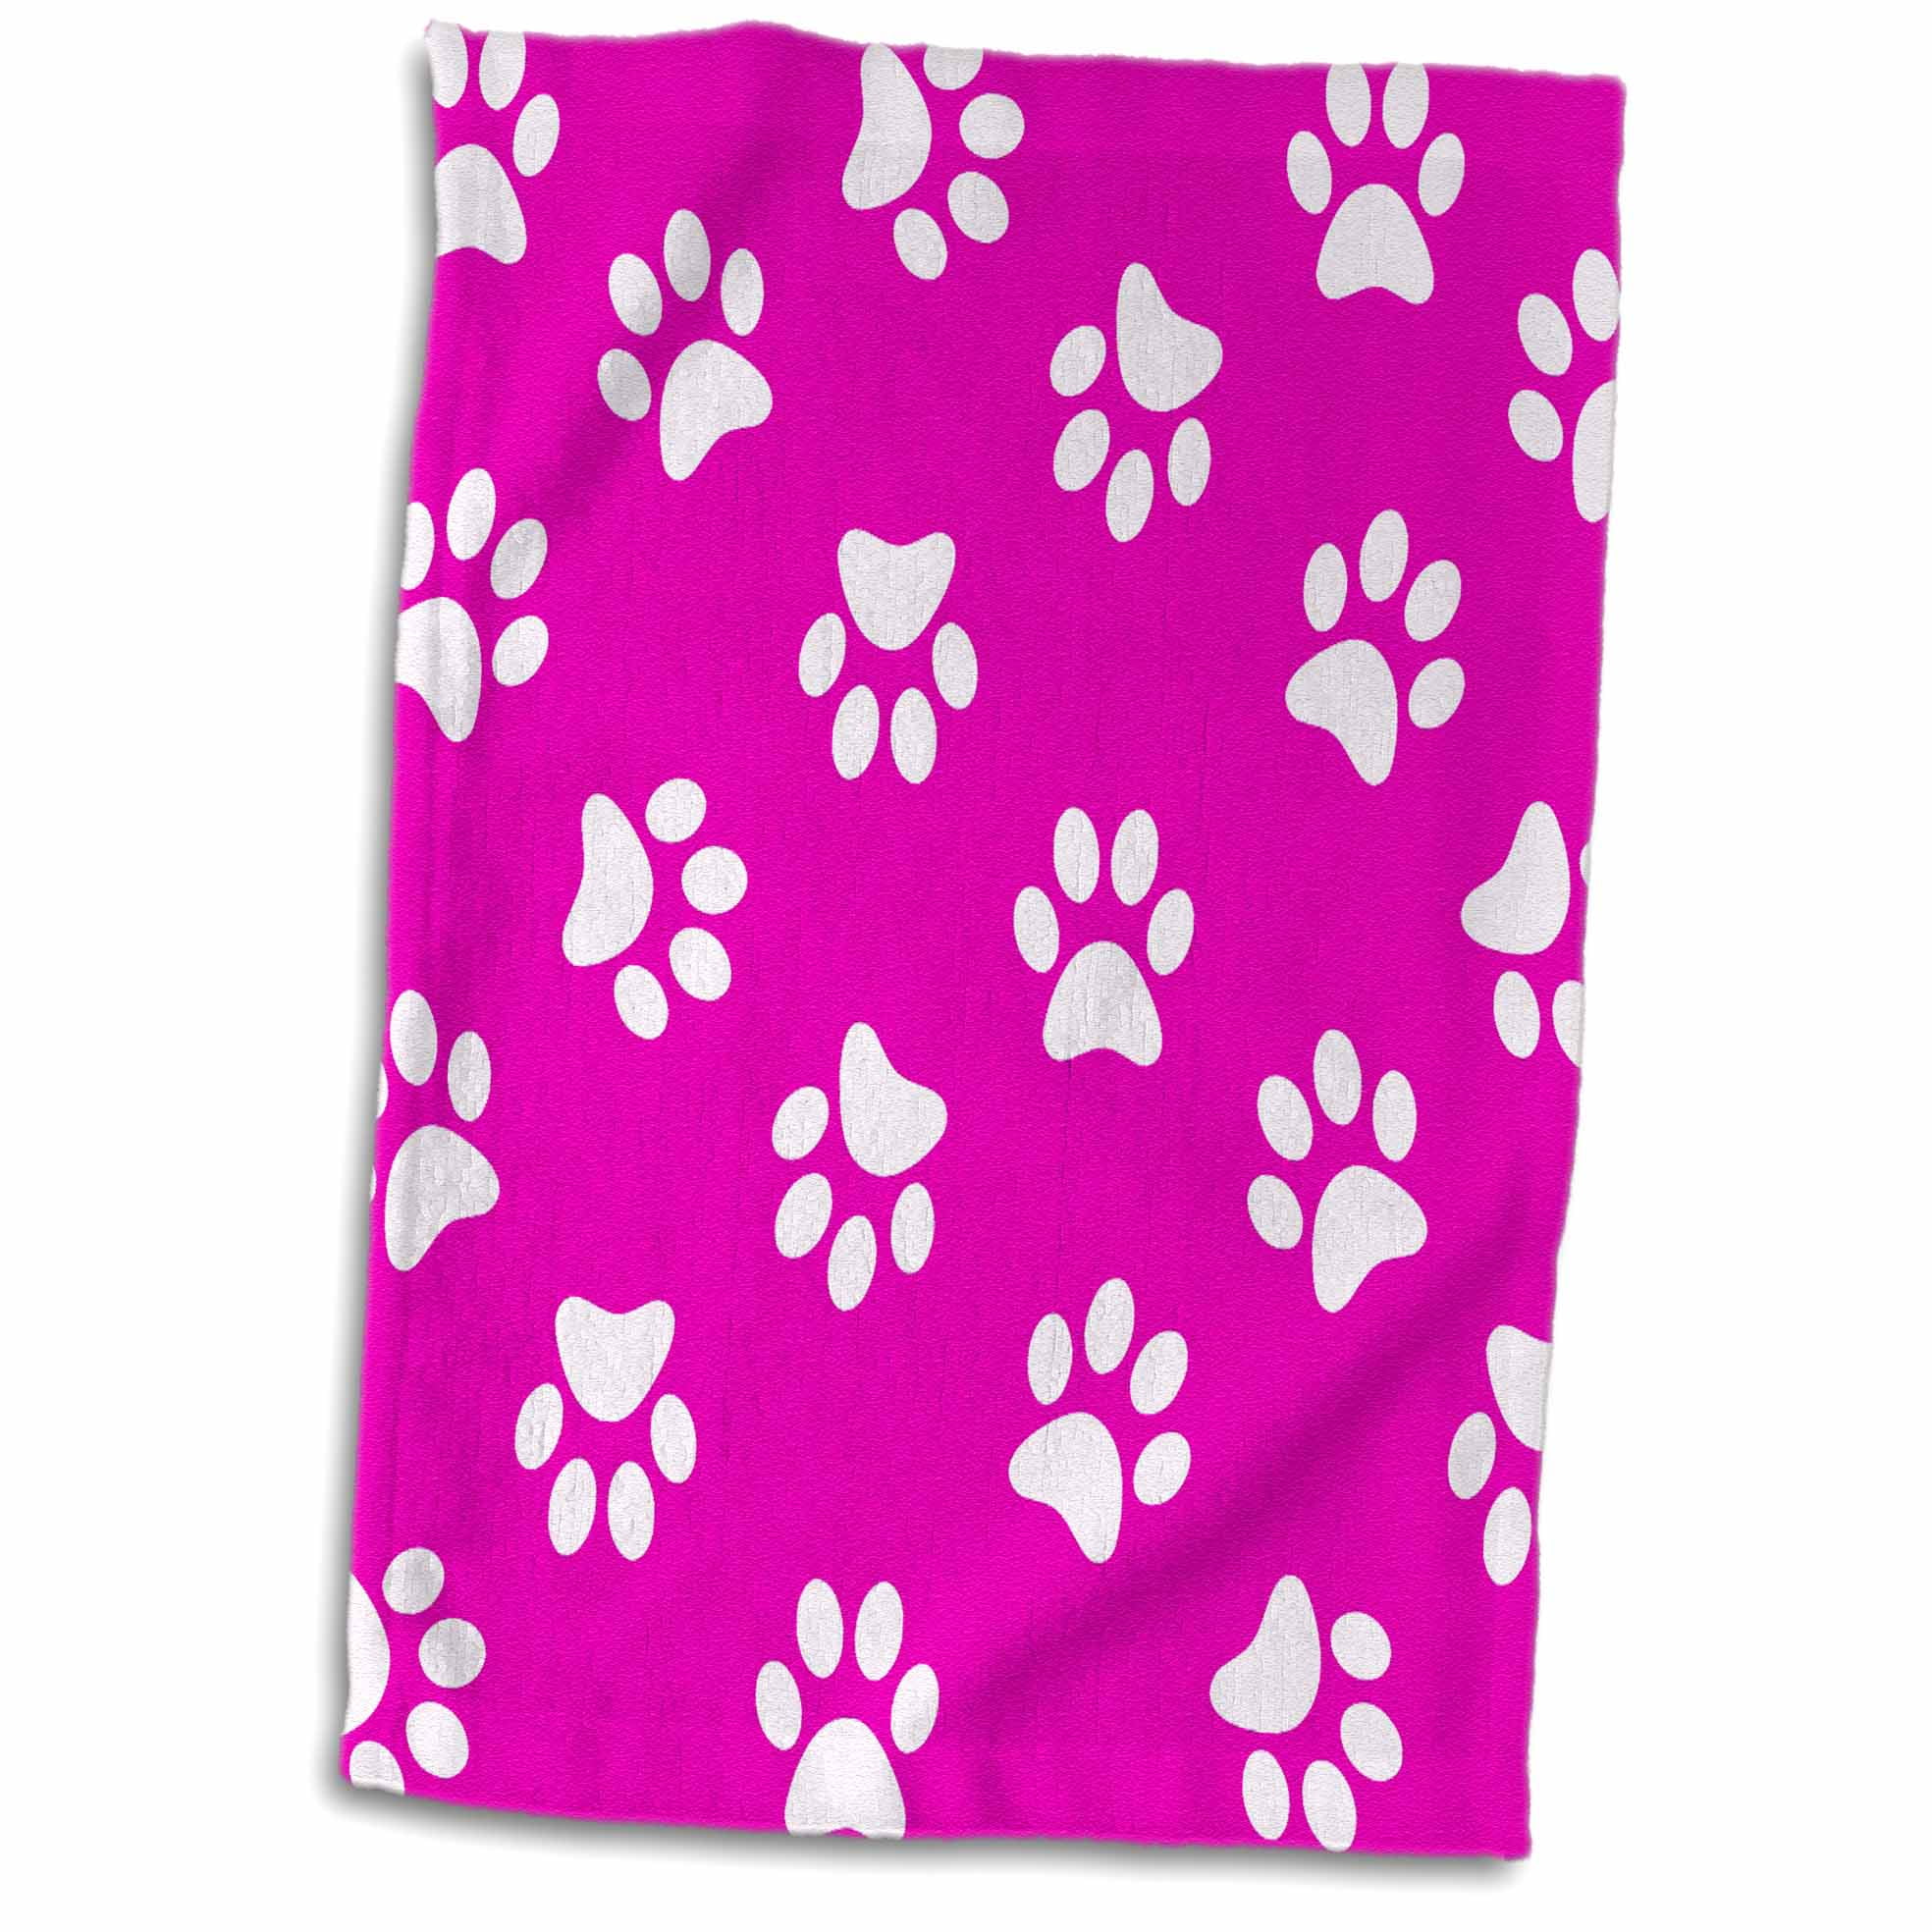 3dRose Hot pink and white Paw print pattern - girly pawprints cute ...